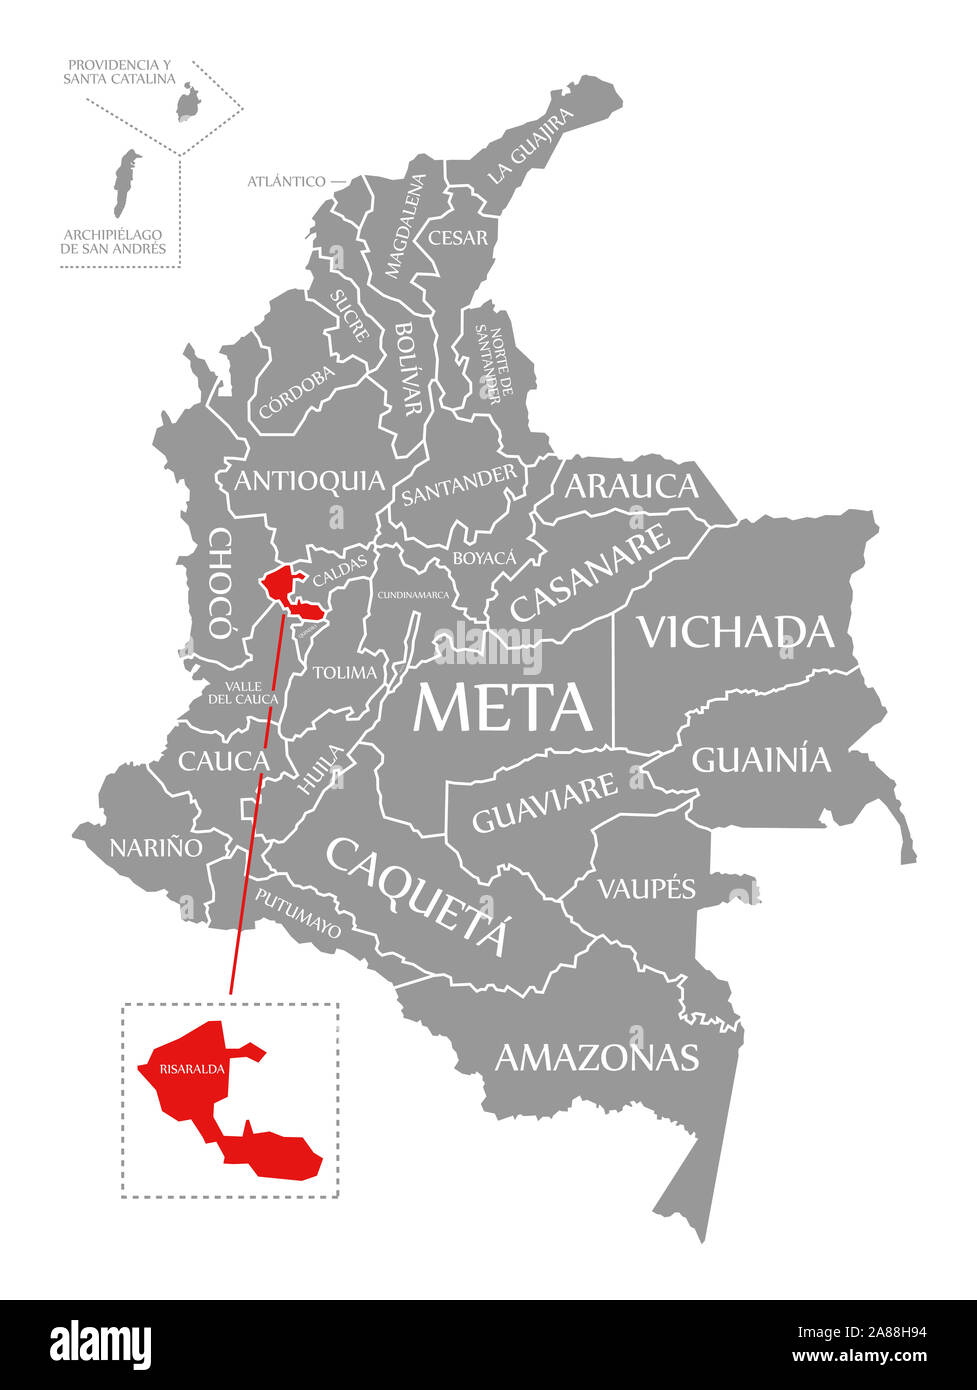 Risaralda red highlighted in map of Colombia Stock Photo